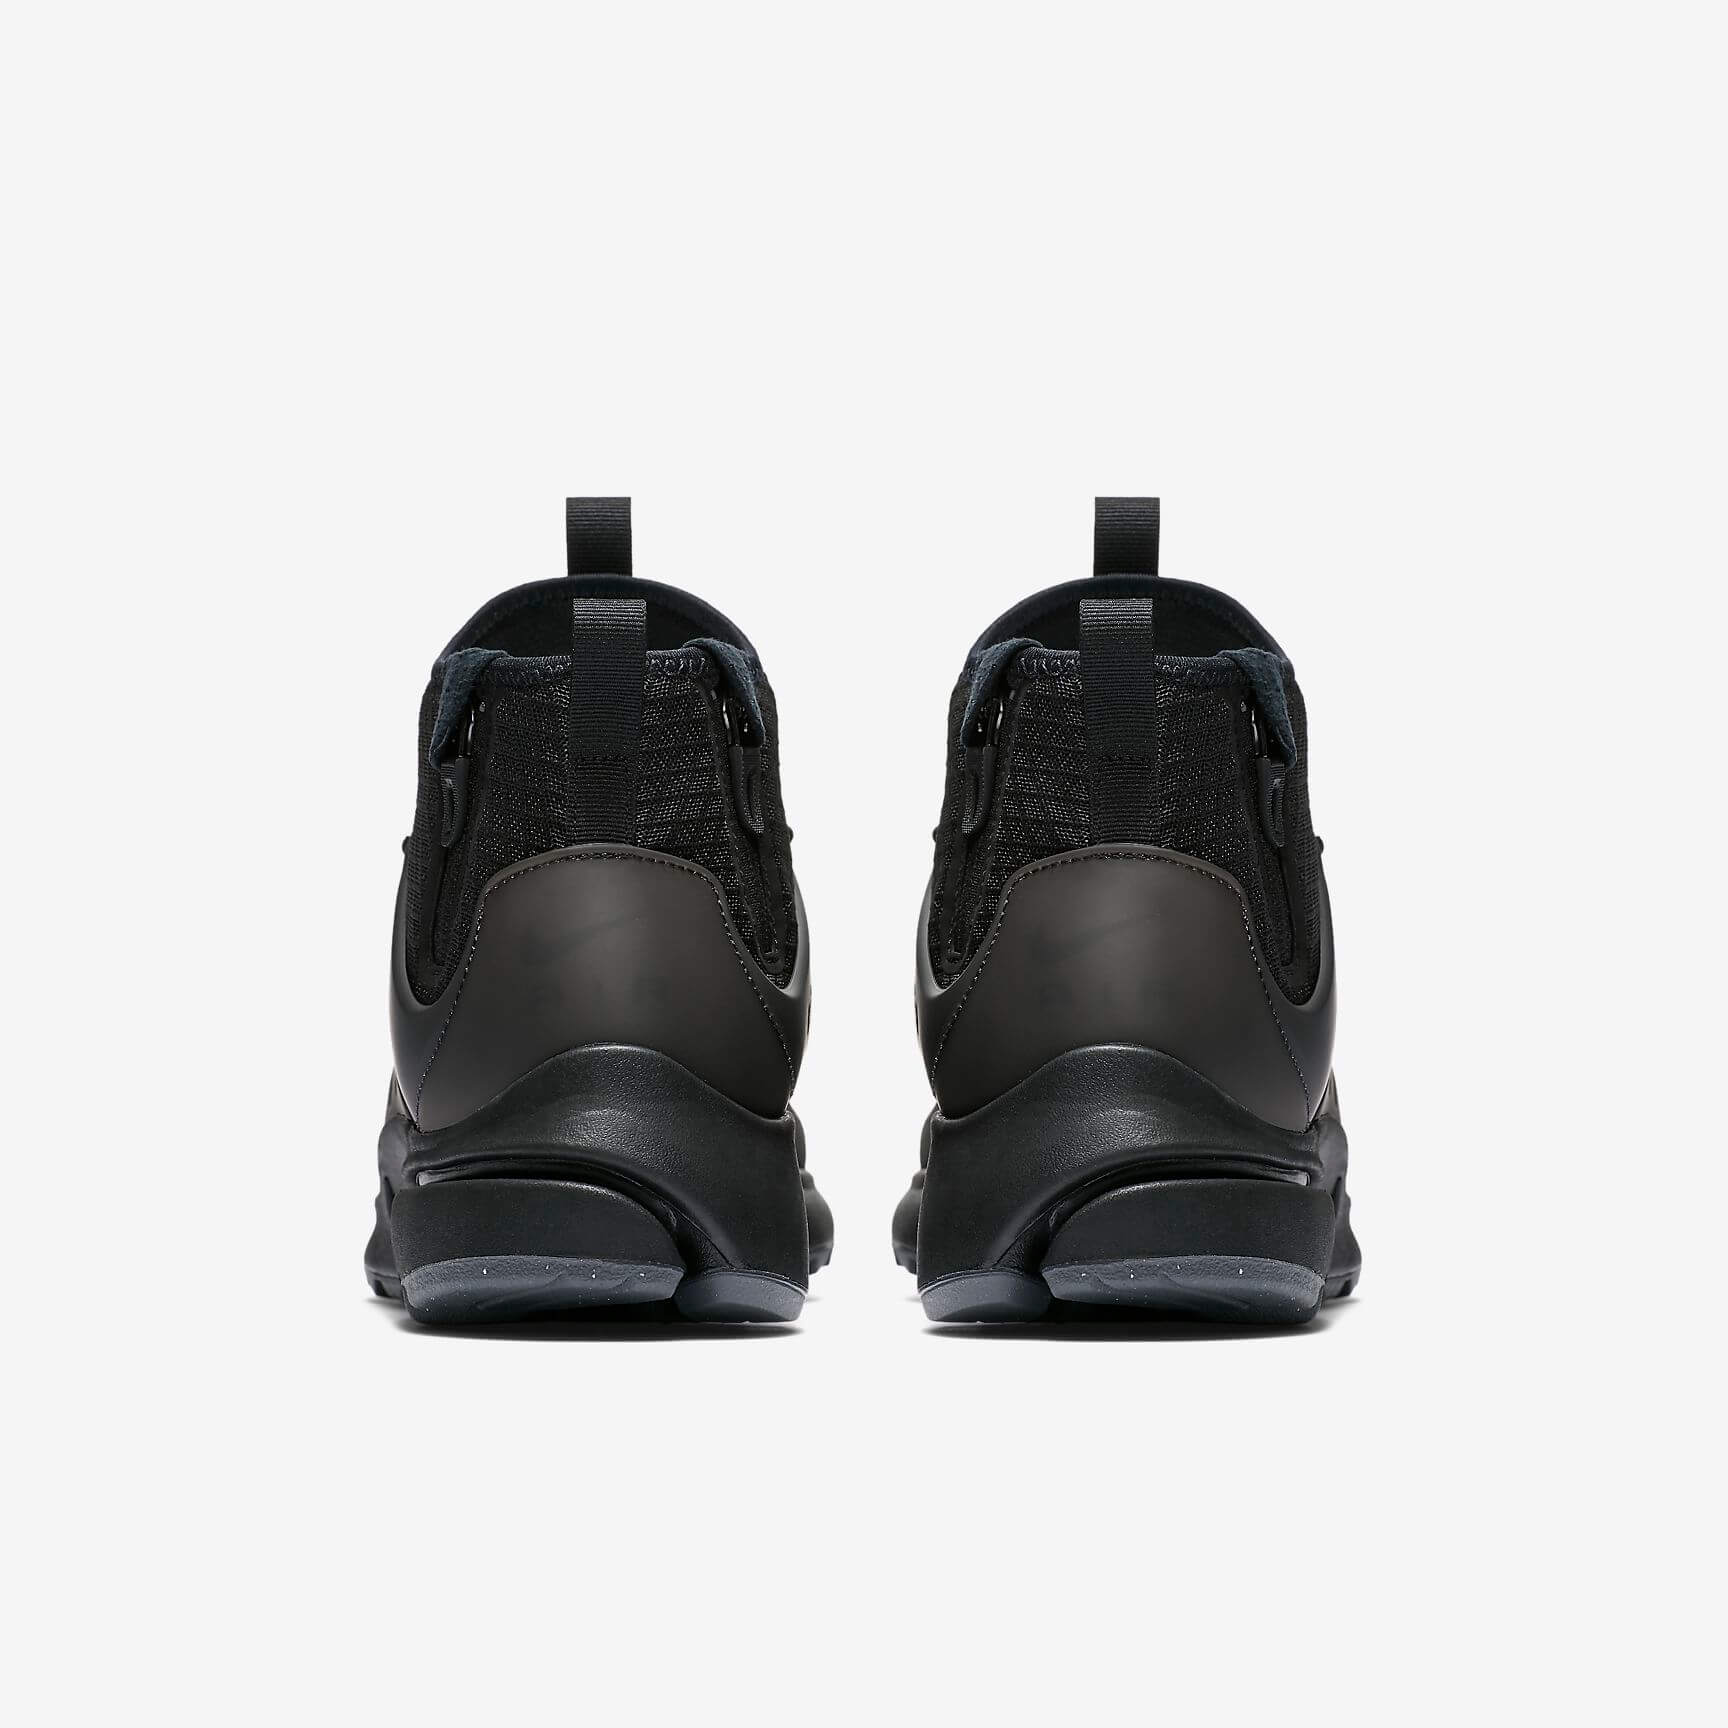 Air Presto Mid Utility Shoes for men 2